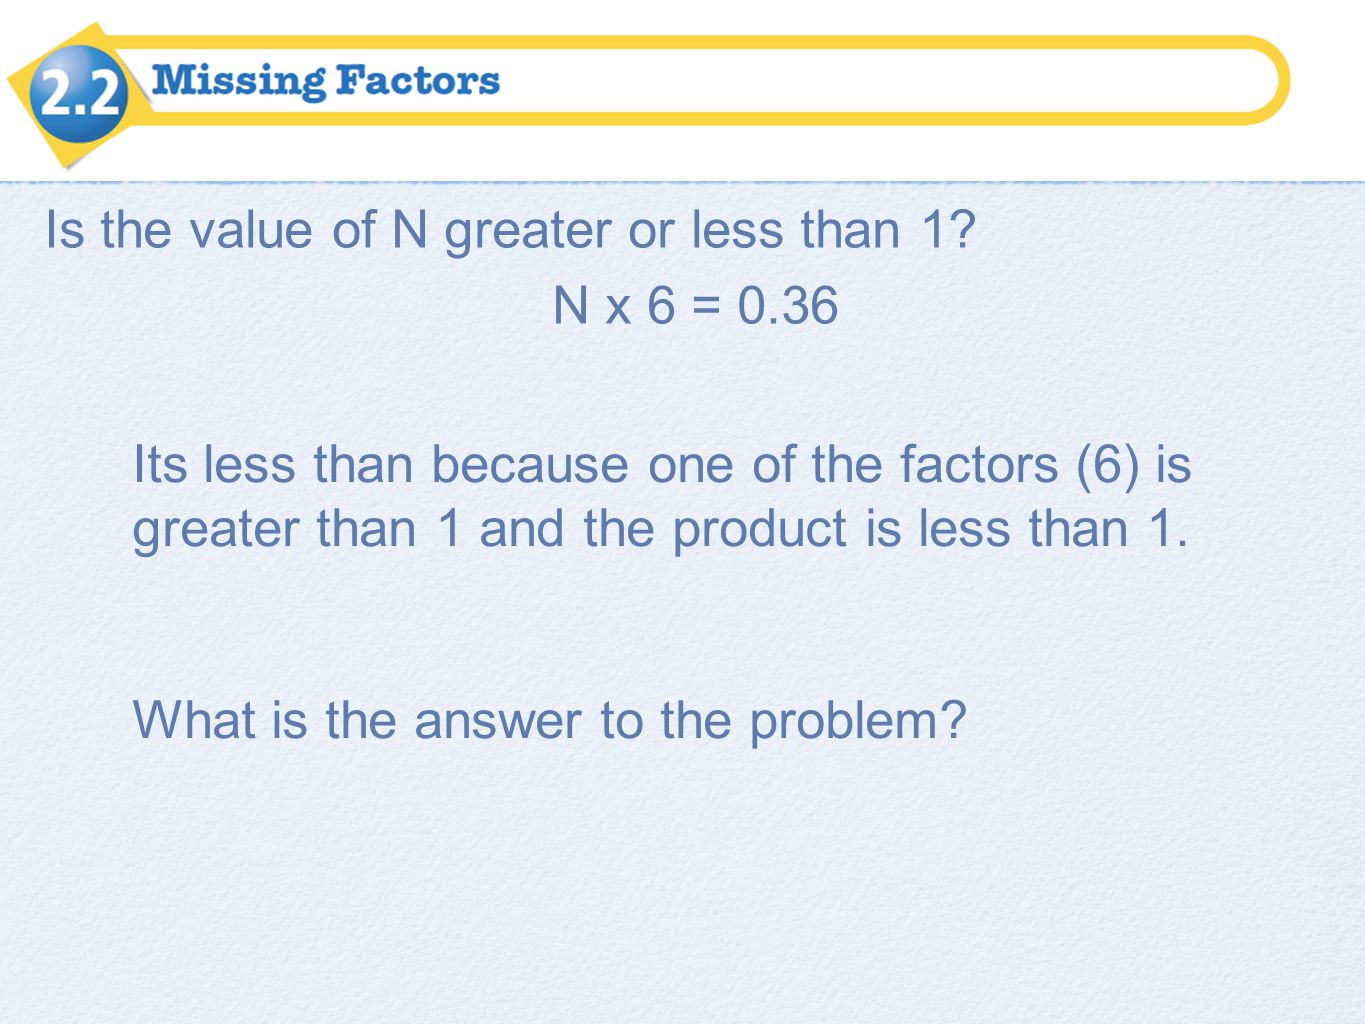 Is the value of N greater or less than 1